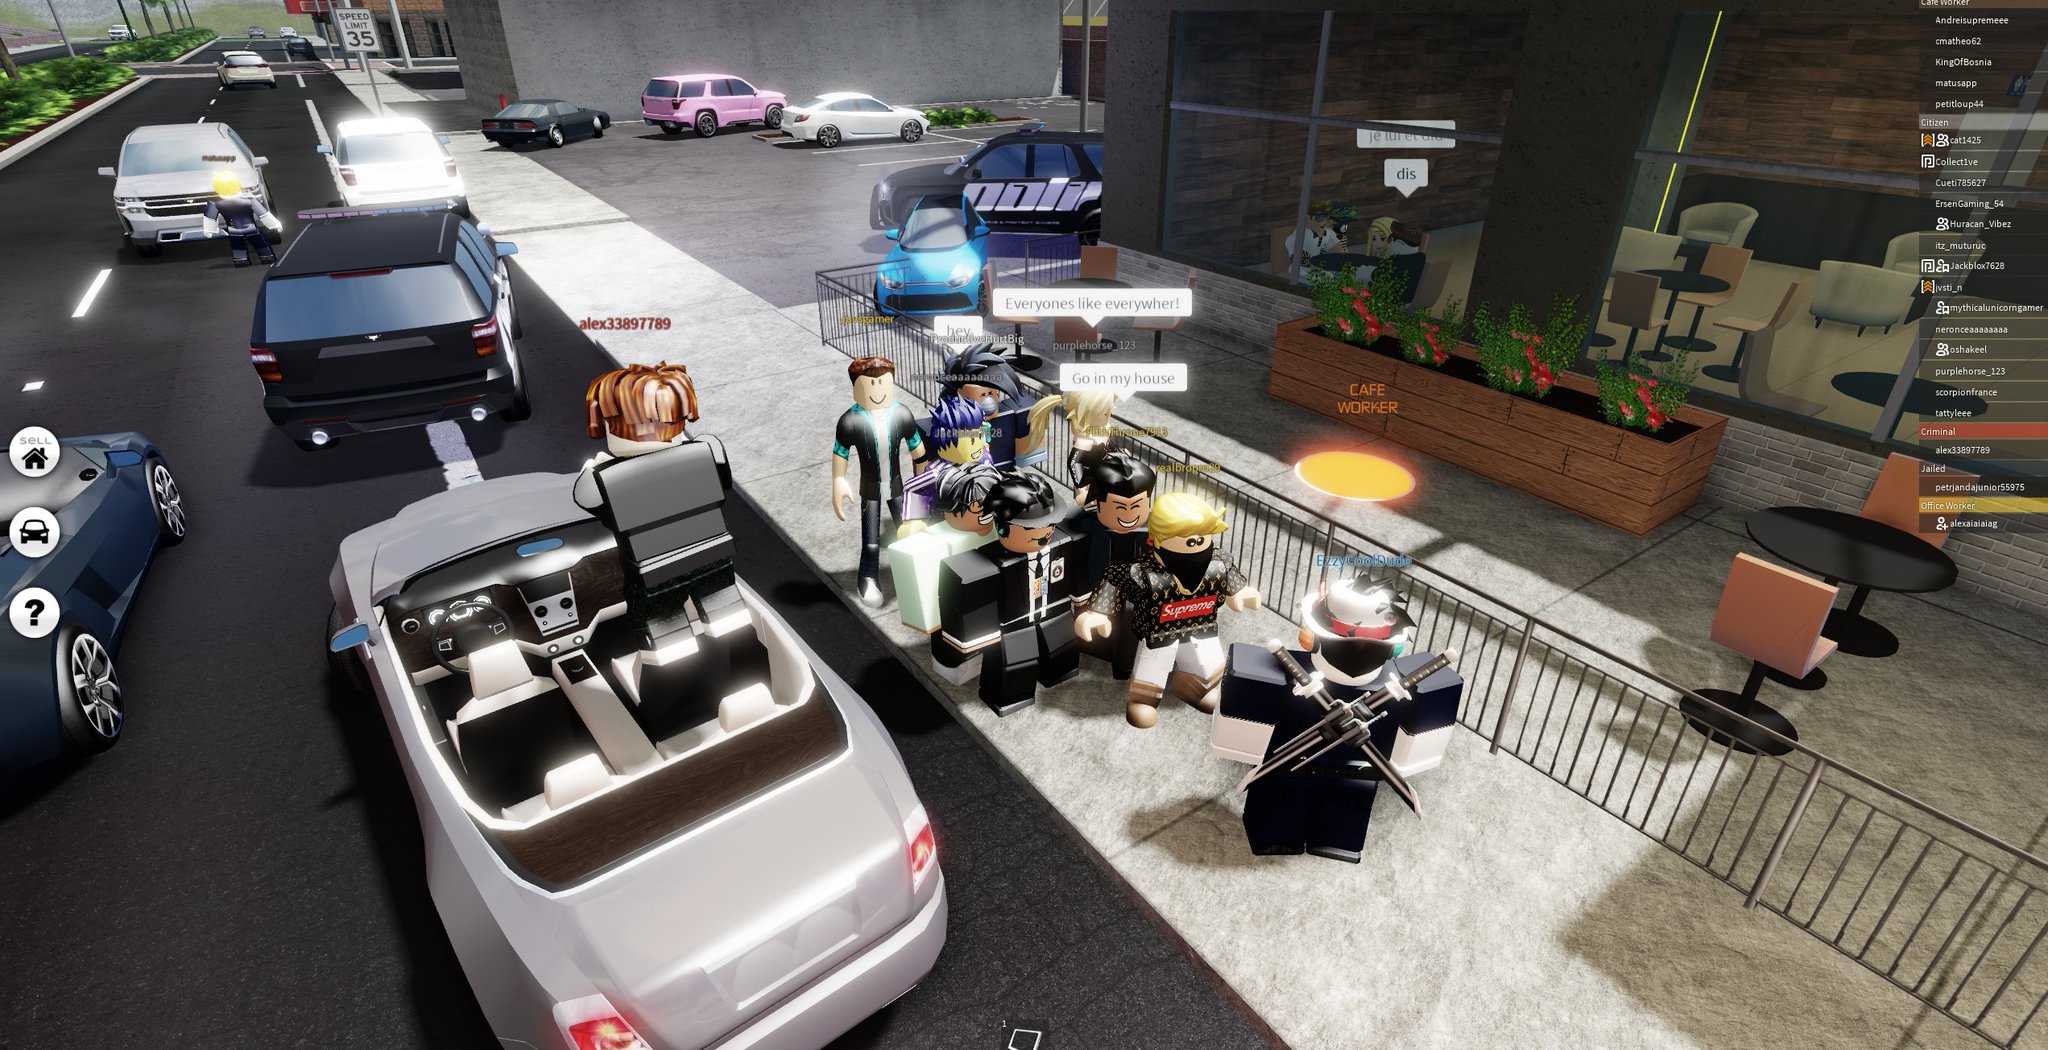 Collect1ve On Twitter Love Meeting The Community Great Bunch Of Players With Some Great Questions And Suggestions Thanks For Playing Pacifico 2 Playground Town If You Haven T Already Play Now Https T Co 3rwks1uuoq Https T Co Zdqkmrliyz - pacifico 2 roblox code